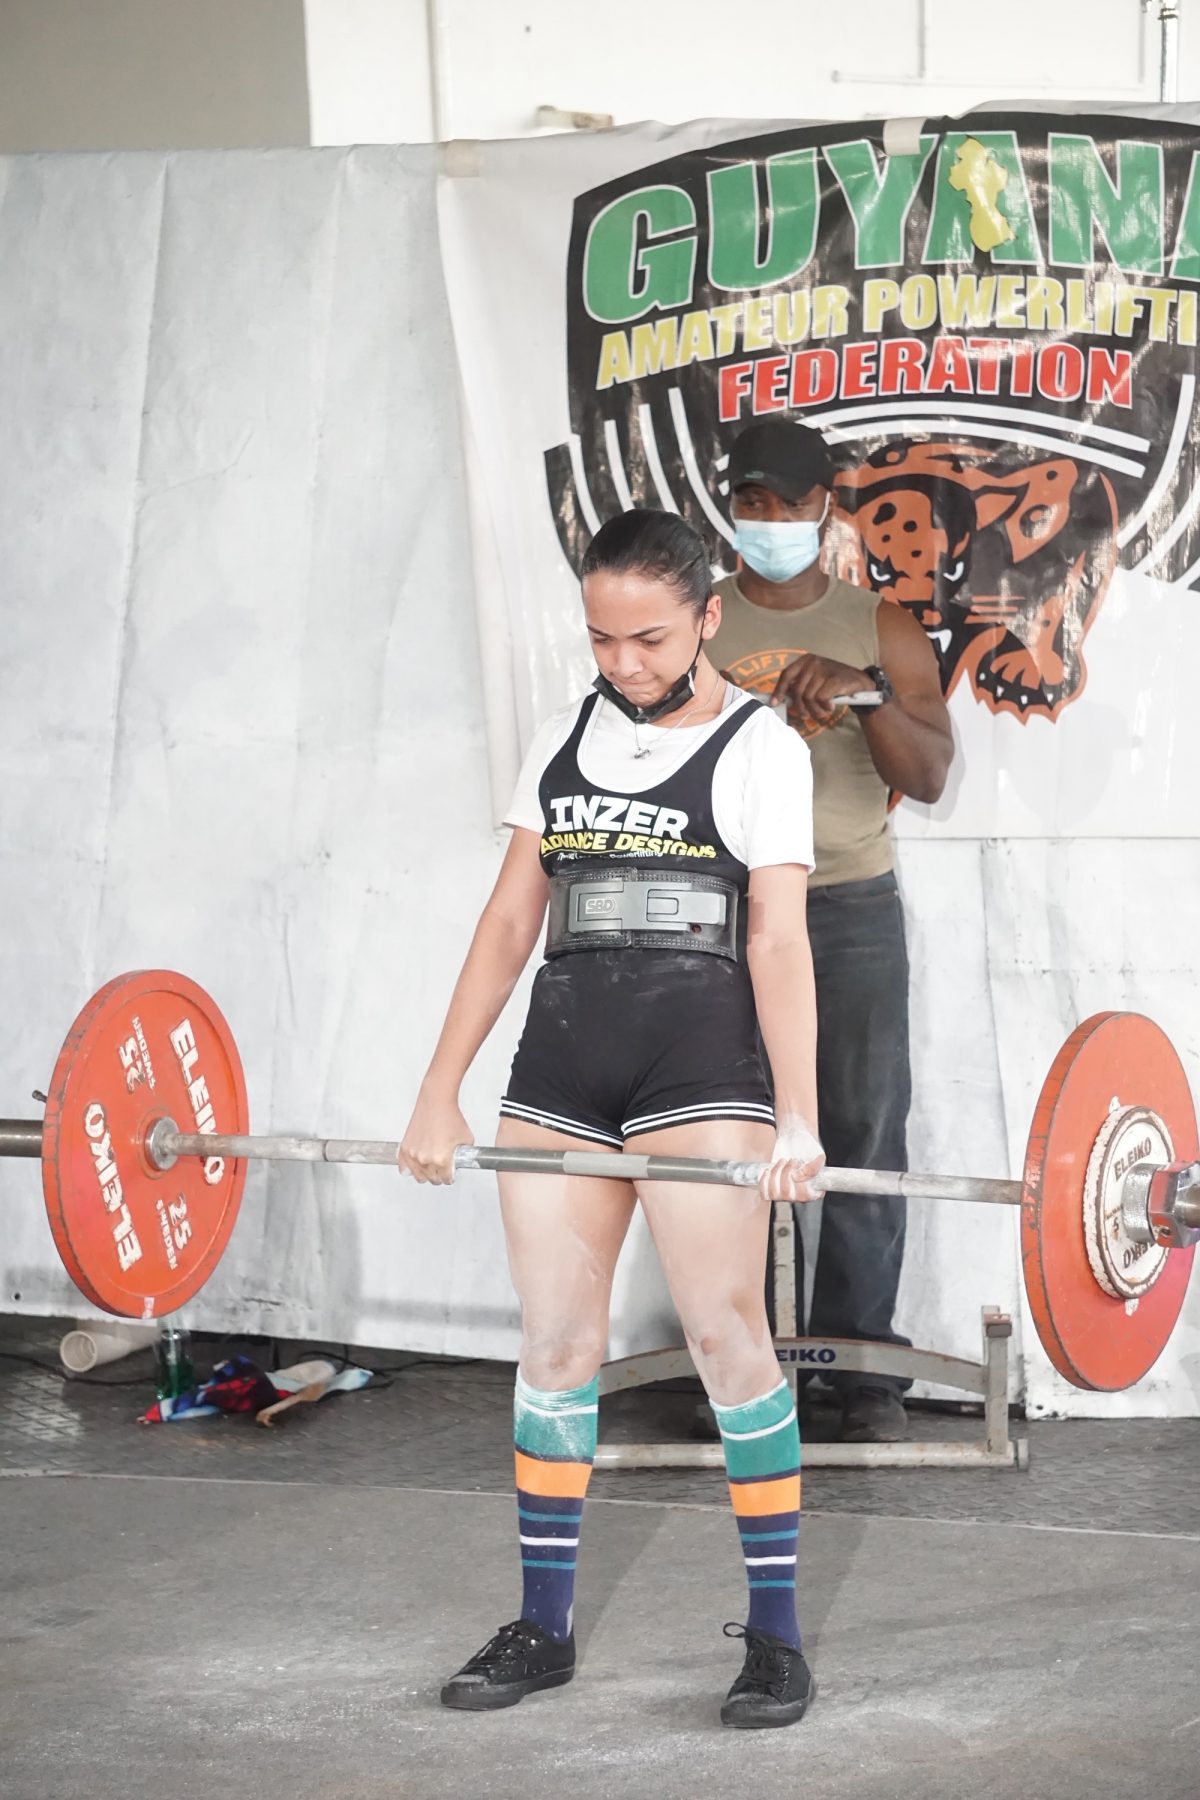 The Novices/Juniors and Sub Juniors Championships will attract the cream of the nations’ juniors, teens and first time lifters looking to display their strength prowess on Sunday